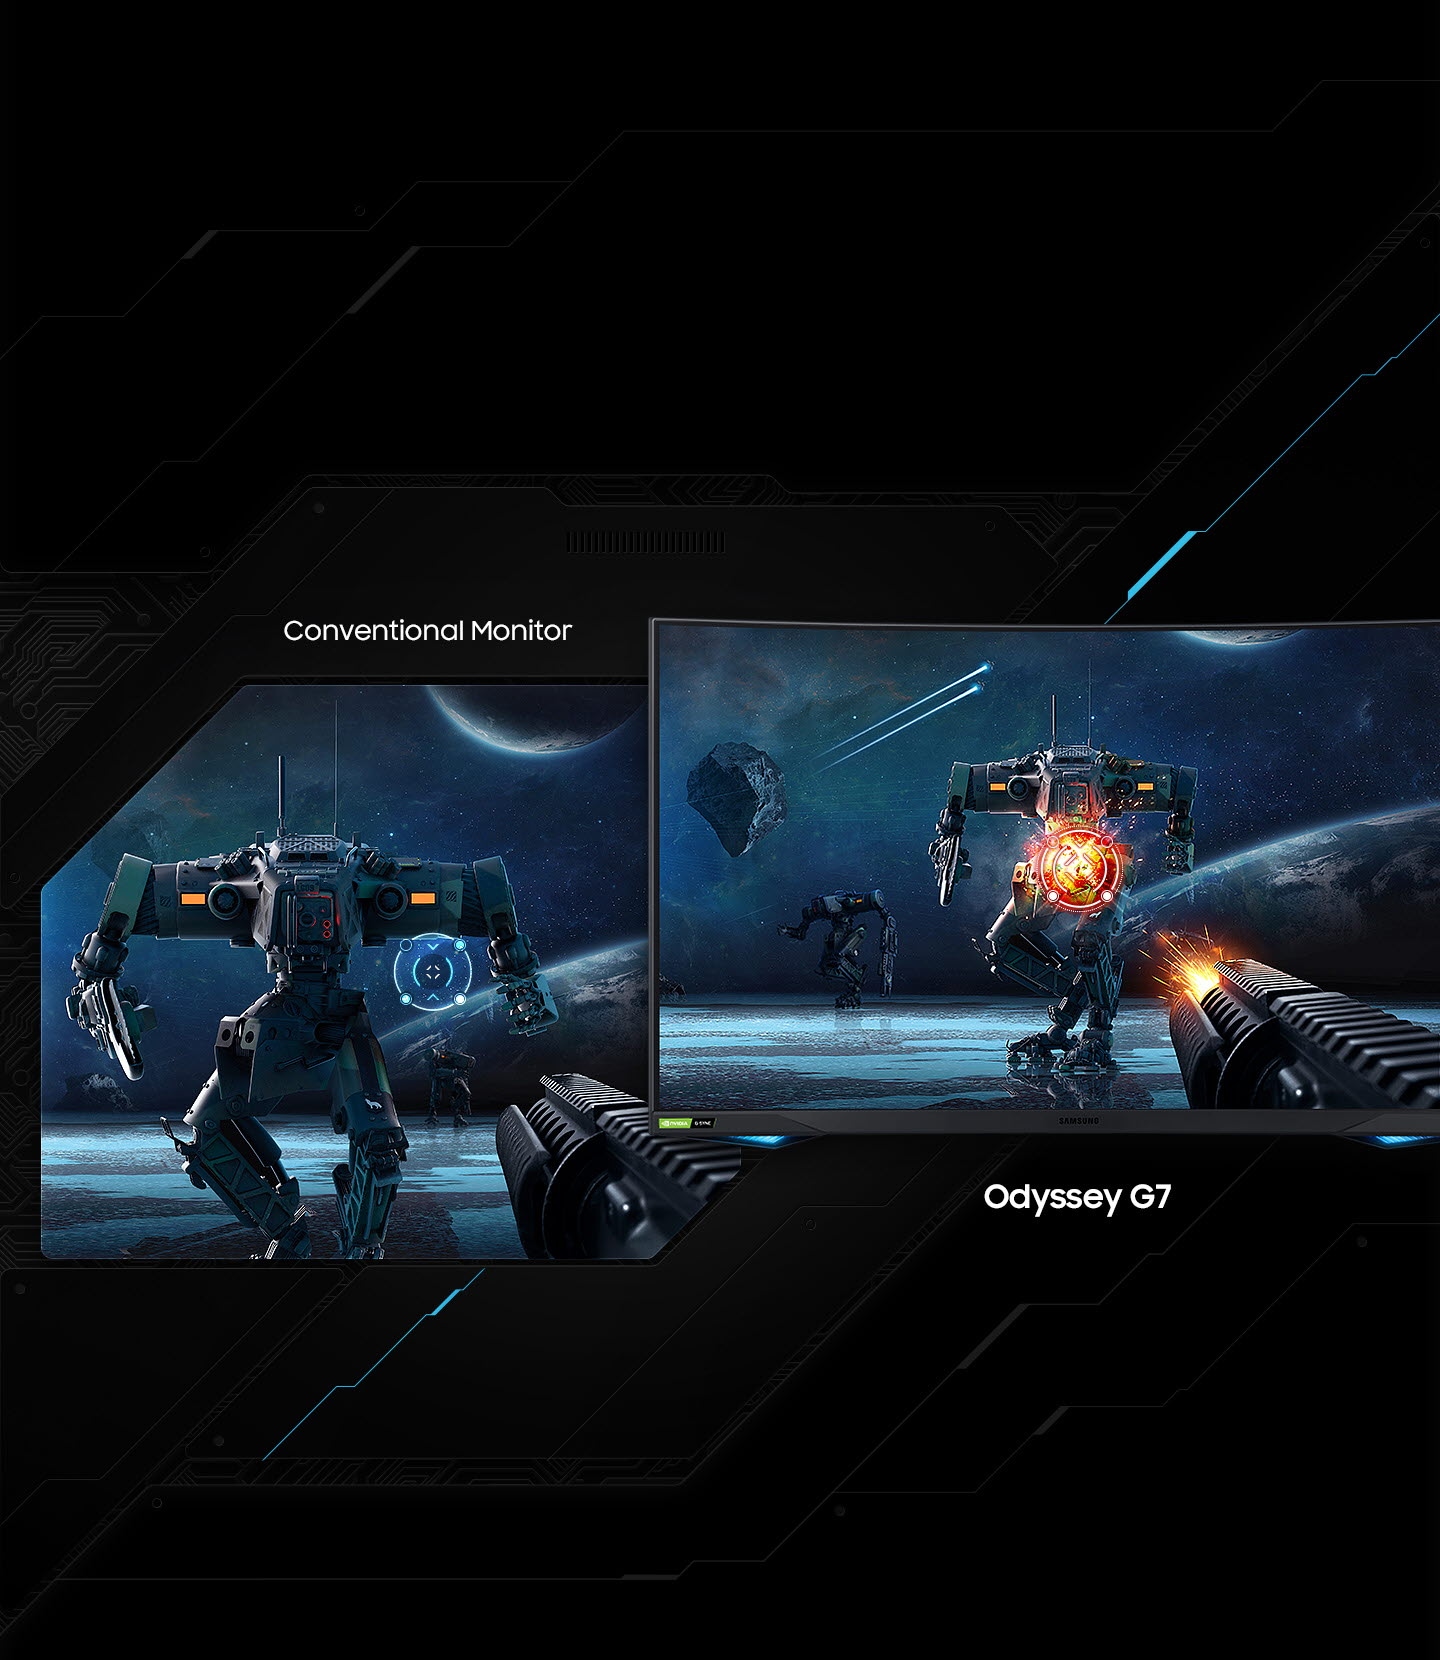 Comparing the Conventional Monitor and the Odyssey G7. On the Conventional Monitor, the bandit doesn't aim right, but on the Odyssey G7, it's a screen to aim and shoot down the bandit.